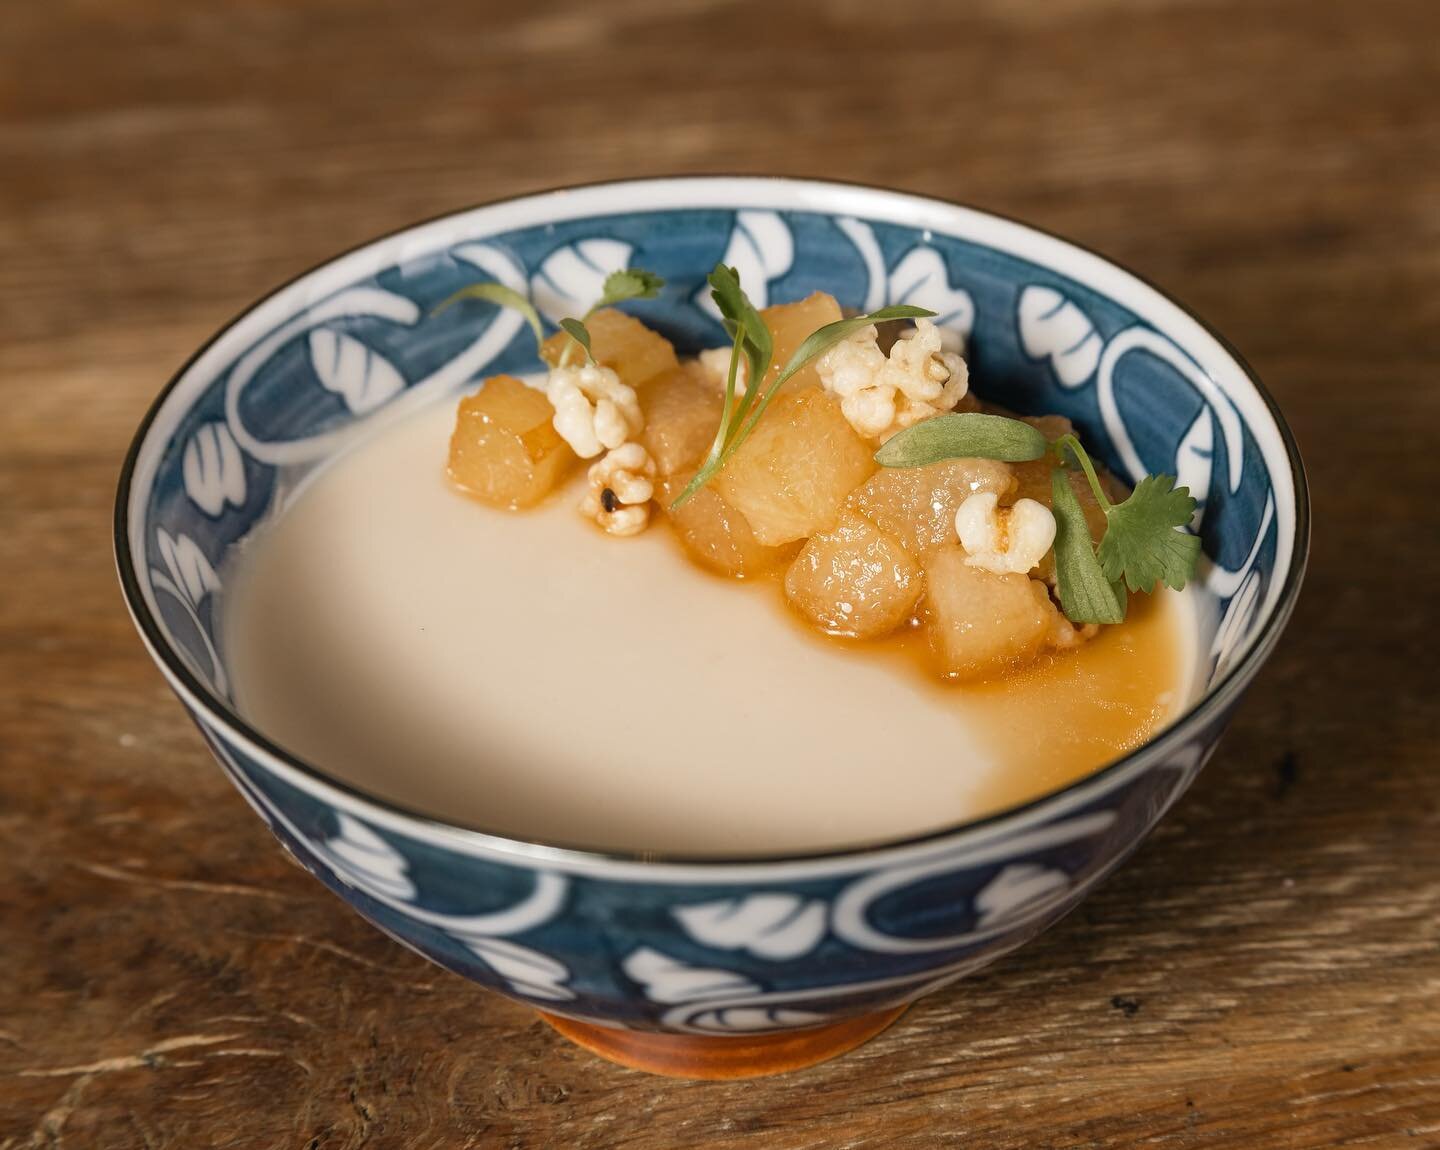 meet our misugaru panna cotta.  it&rsquo;s deliciously creamy with a melt-in-the-mouth texture and a beautiful balance of sweet and savory.

Laura Sawicki @sawickiwickiwicki , the latest member to join our team, has been working her wizardry in the k